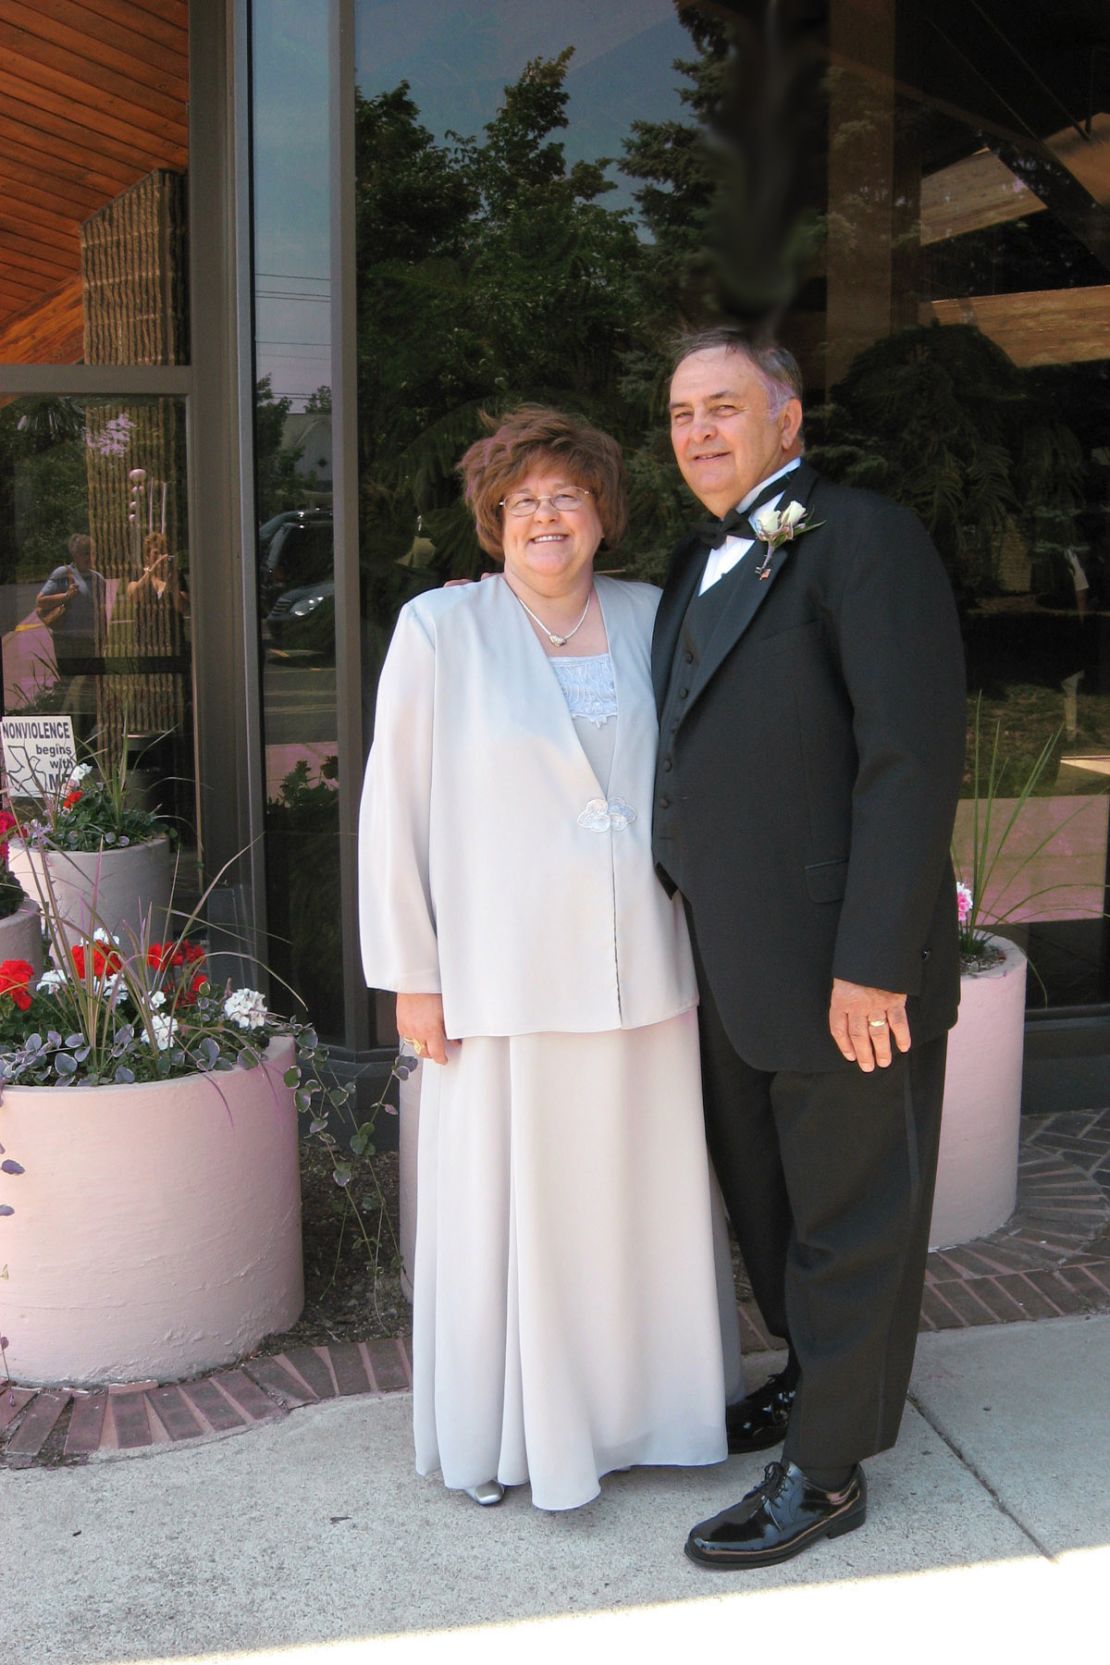 Kathy and Frank Korona pose for a photo at a July 2008 wedding reception. 